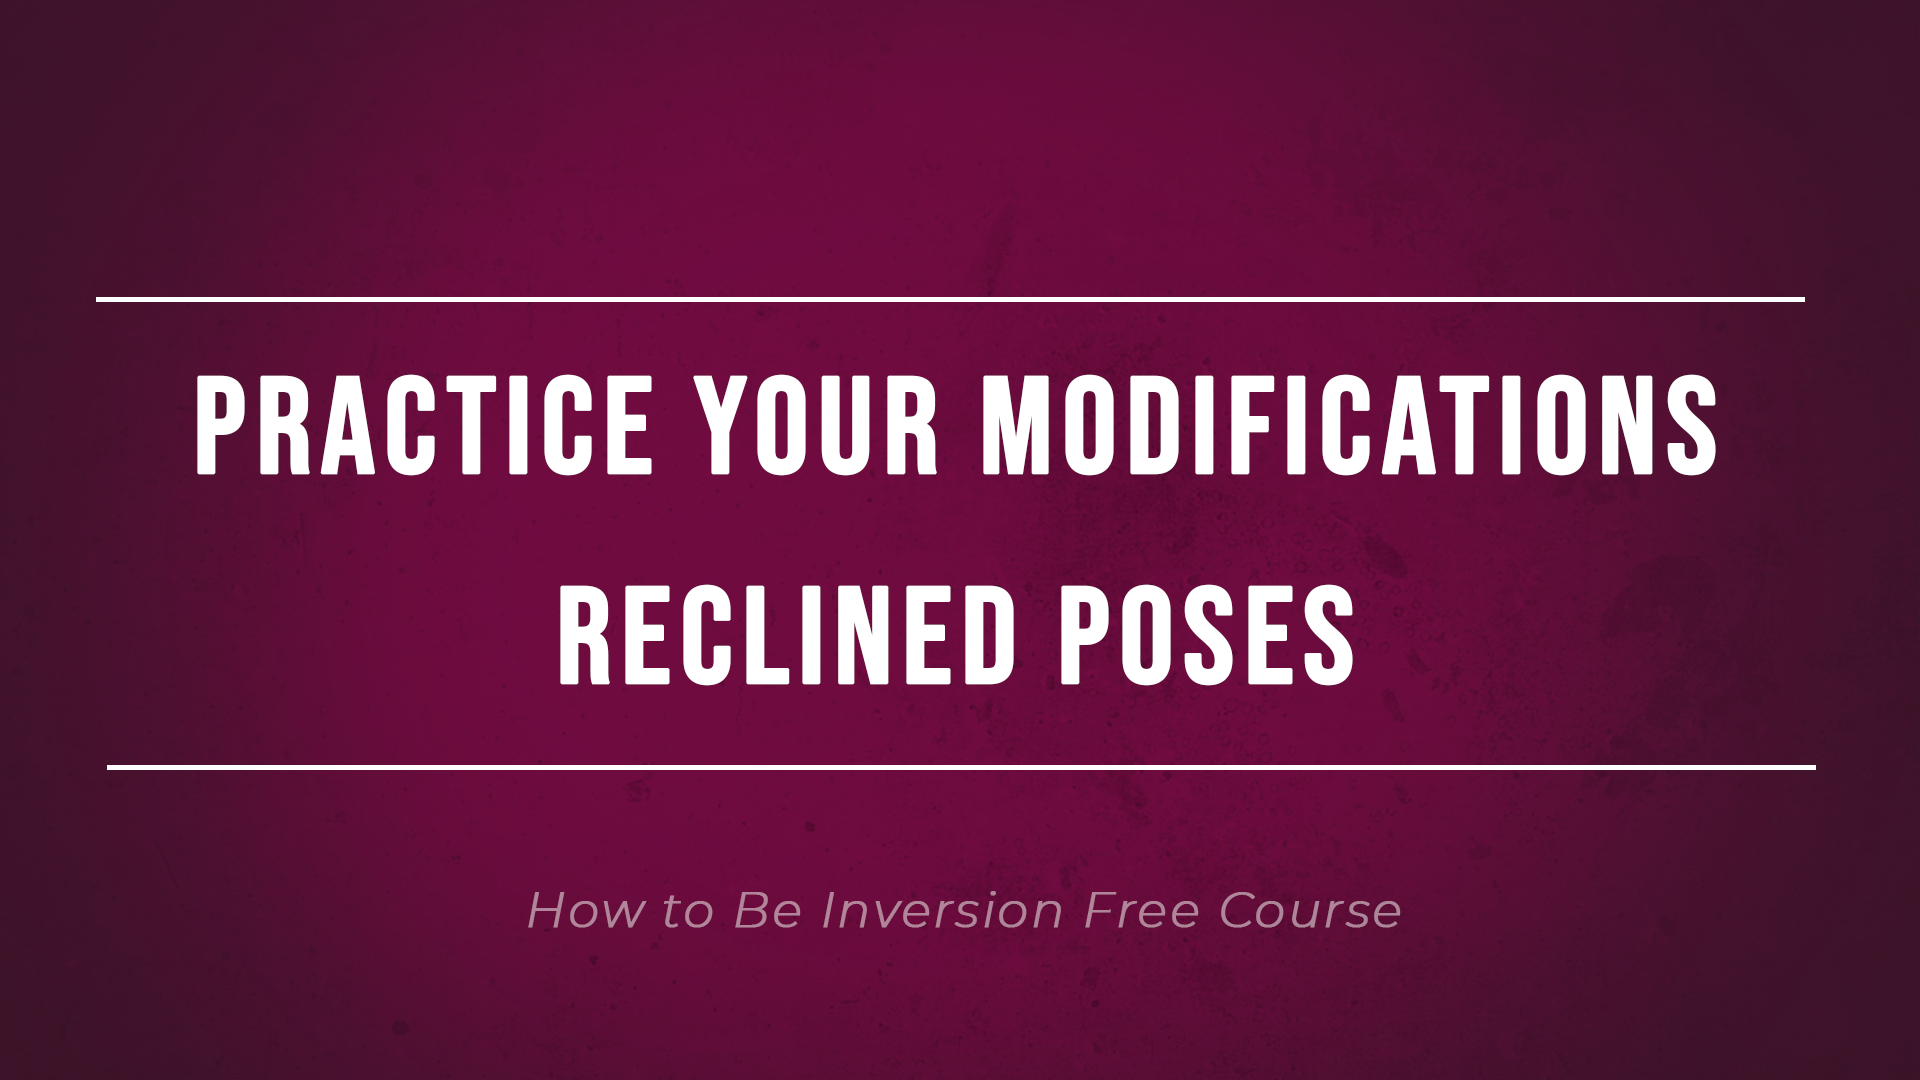 Practice Your Modifications Reclined Poses